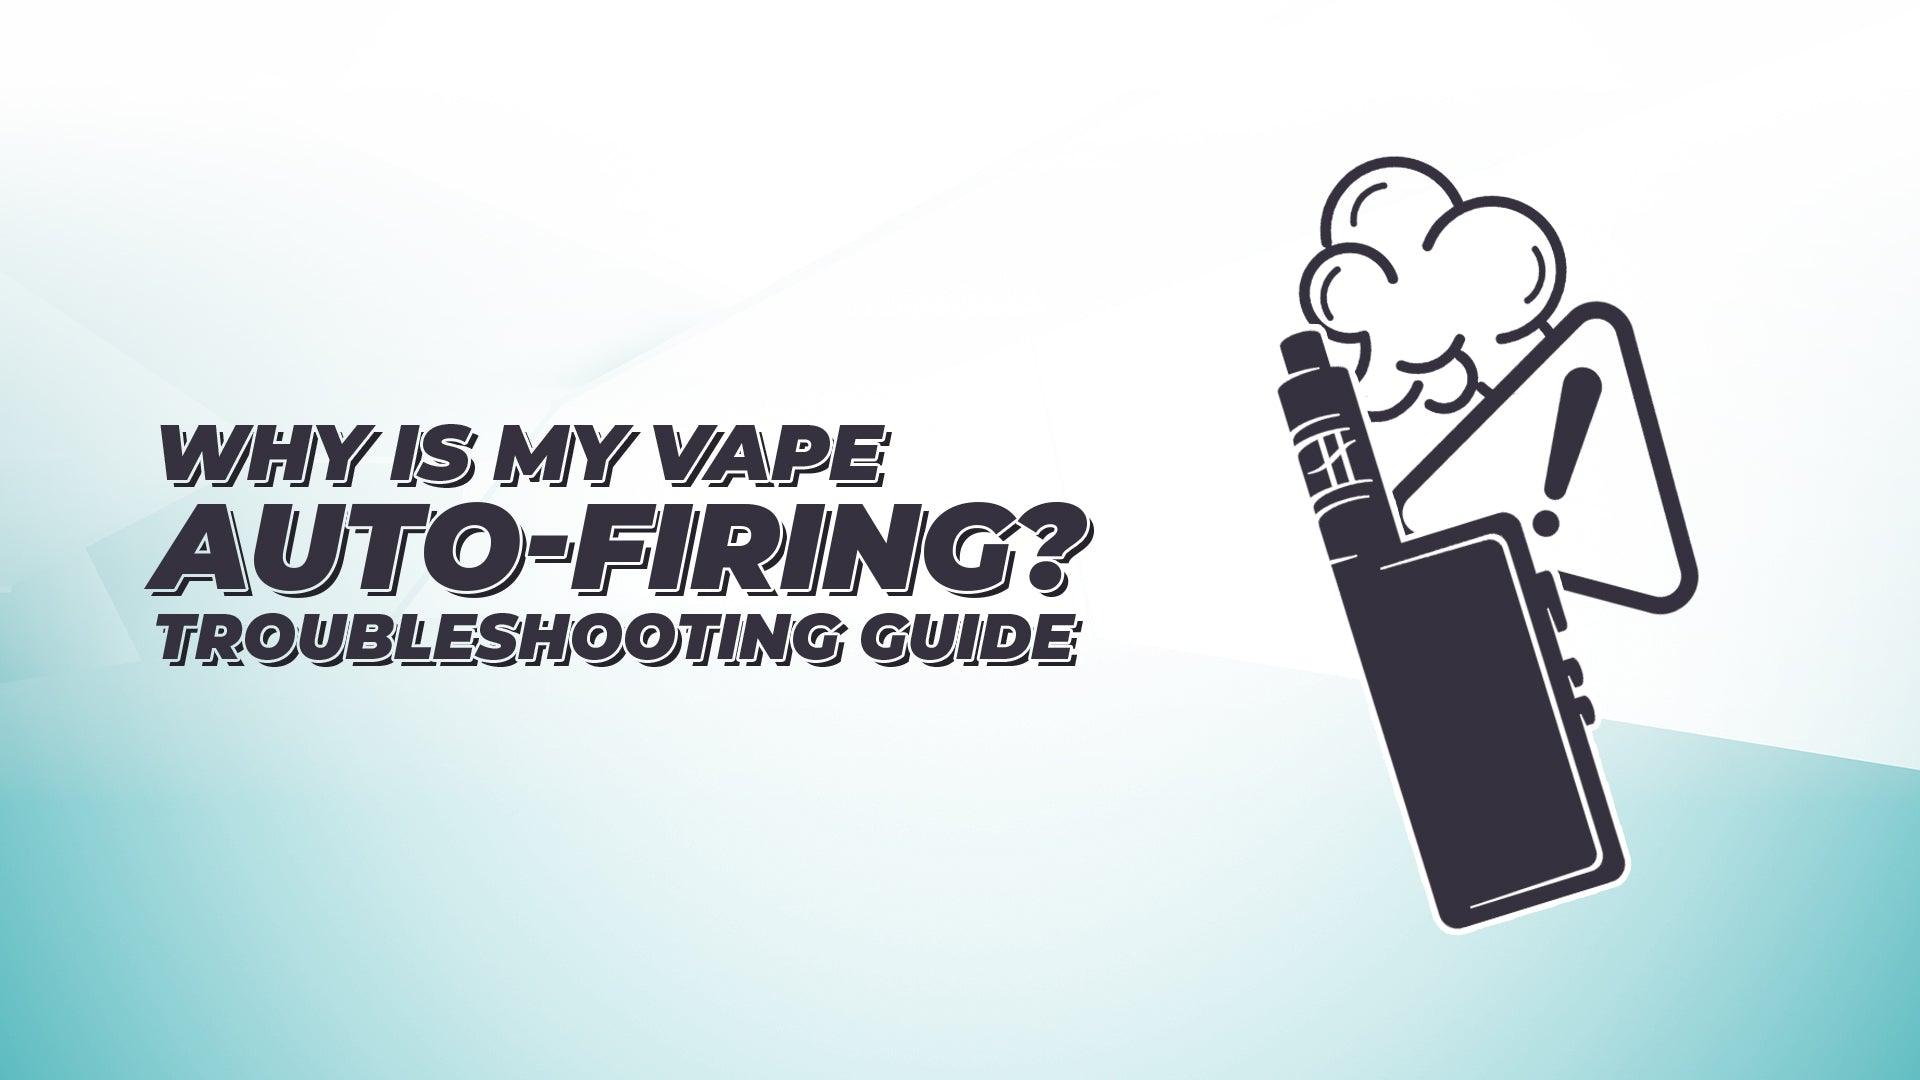 Why Is My Vape Auto-Firing? Troubleshooting Guide - Category:Vape Kits, Sub Category:Safety